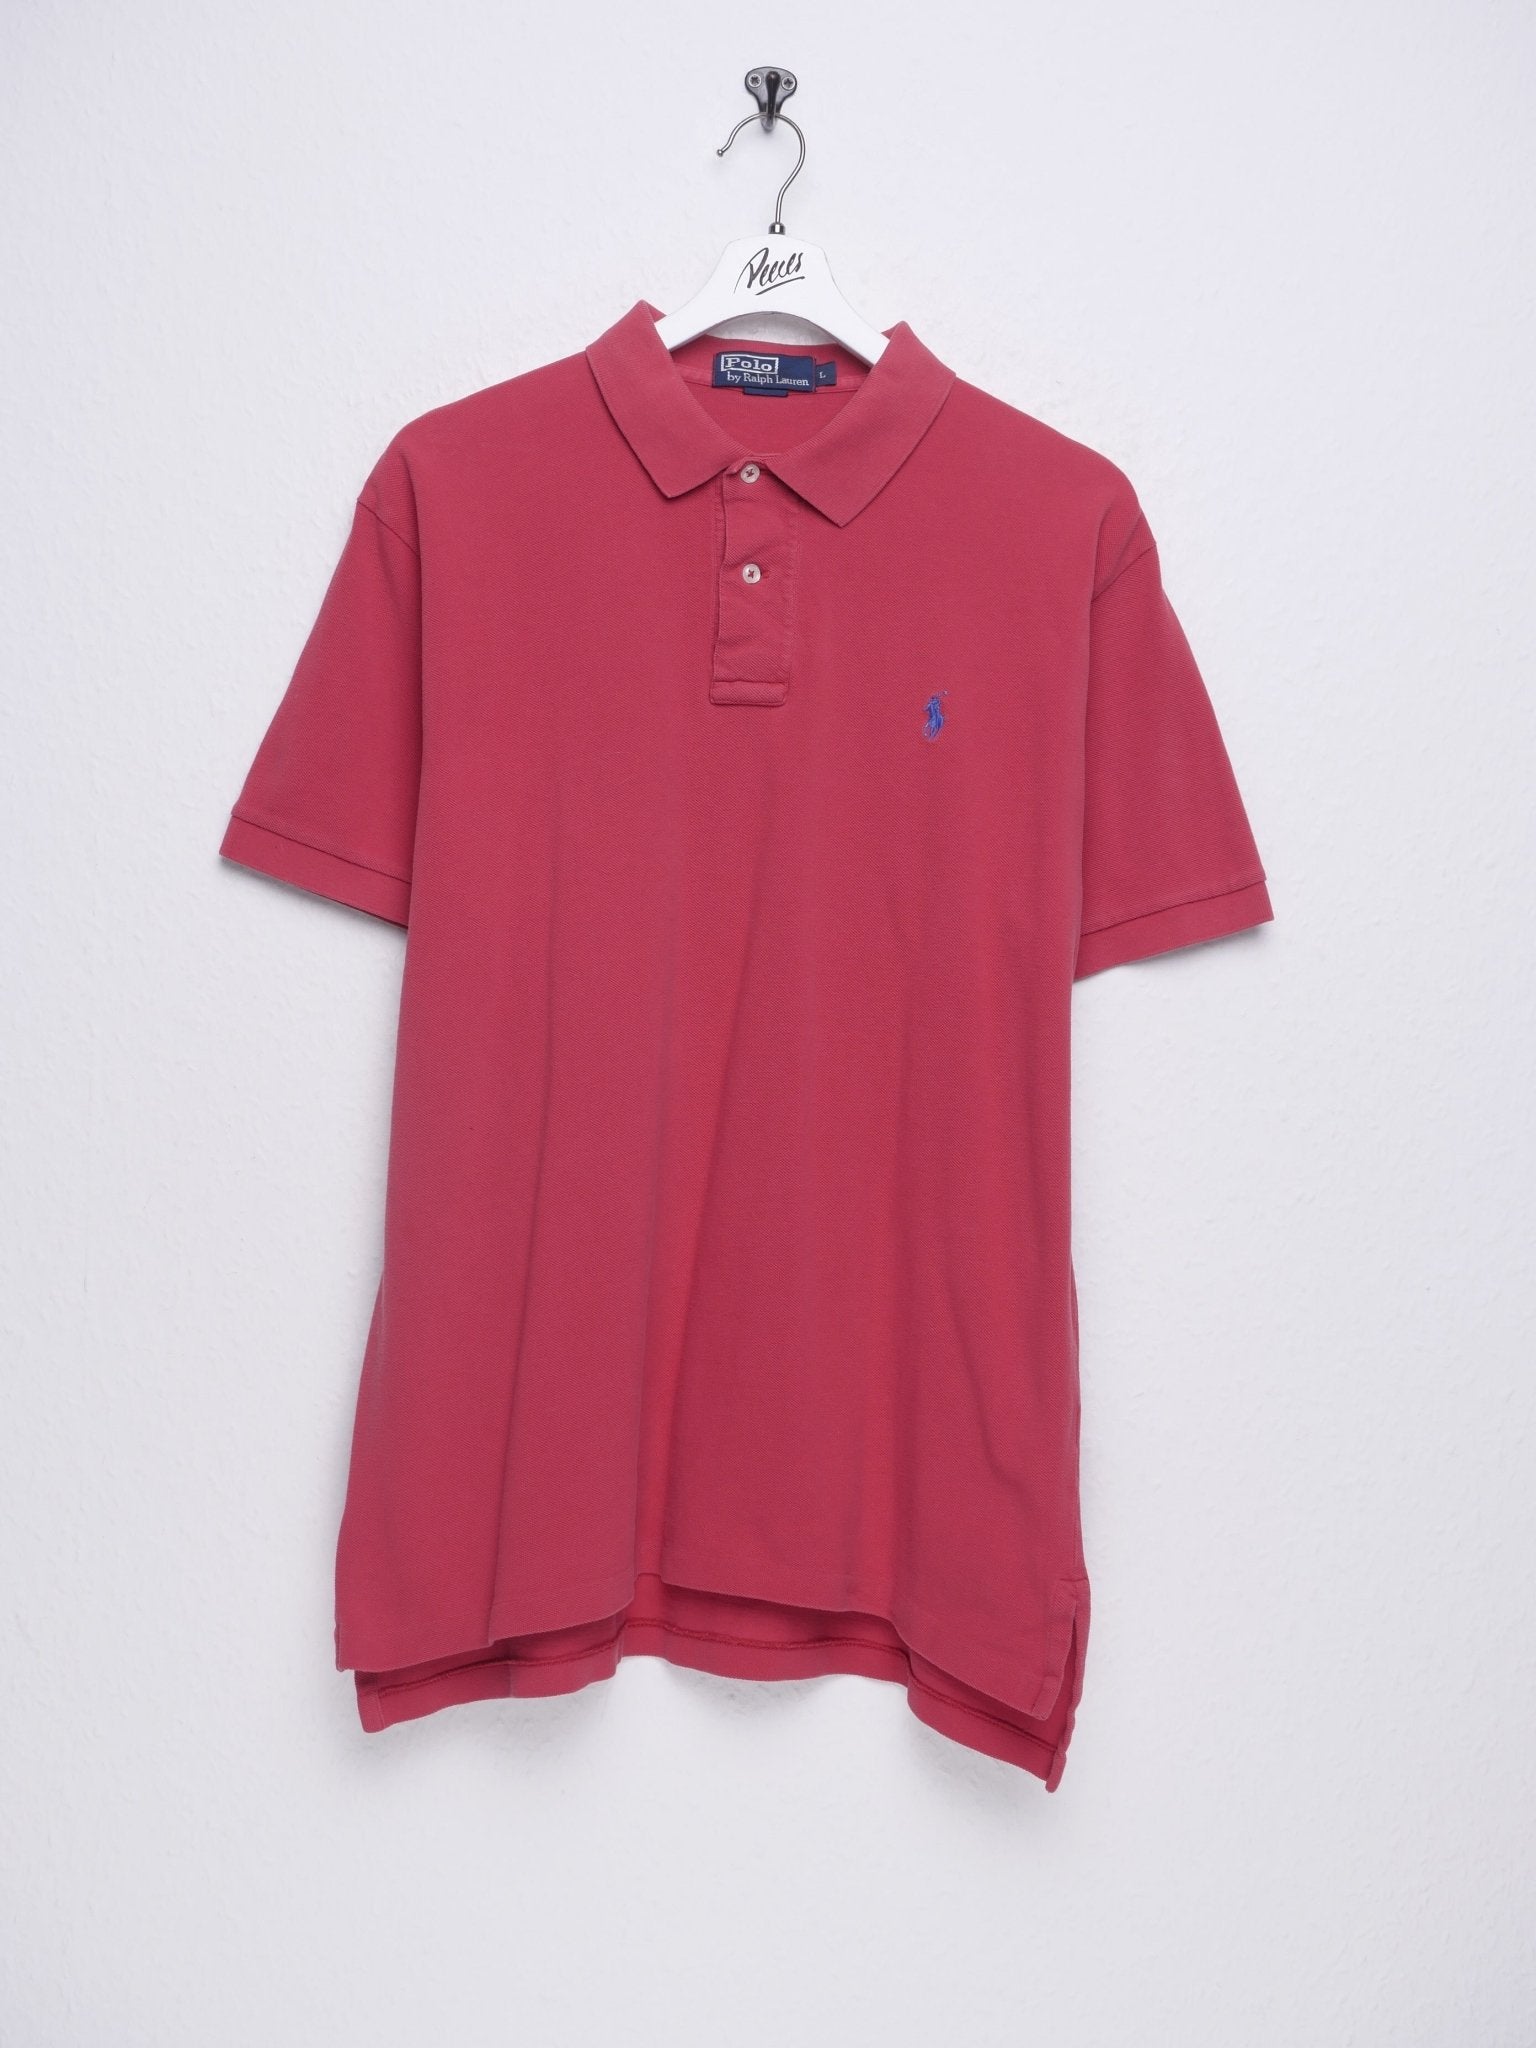 Polo Ralph Lauren embroidered blue Logo red S/S Polo Shirt - Peeces